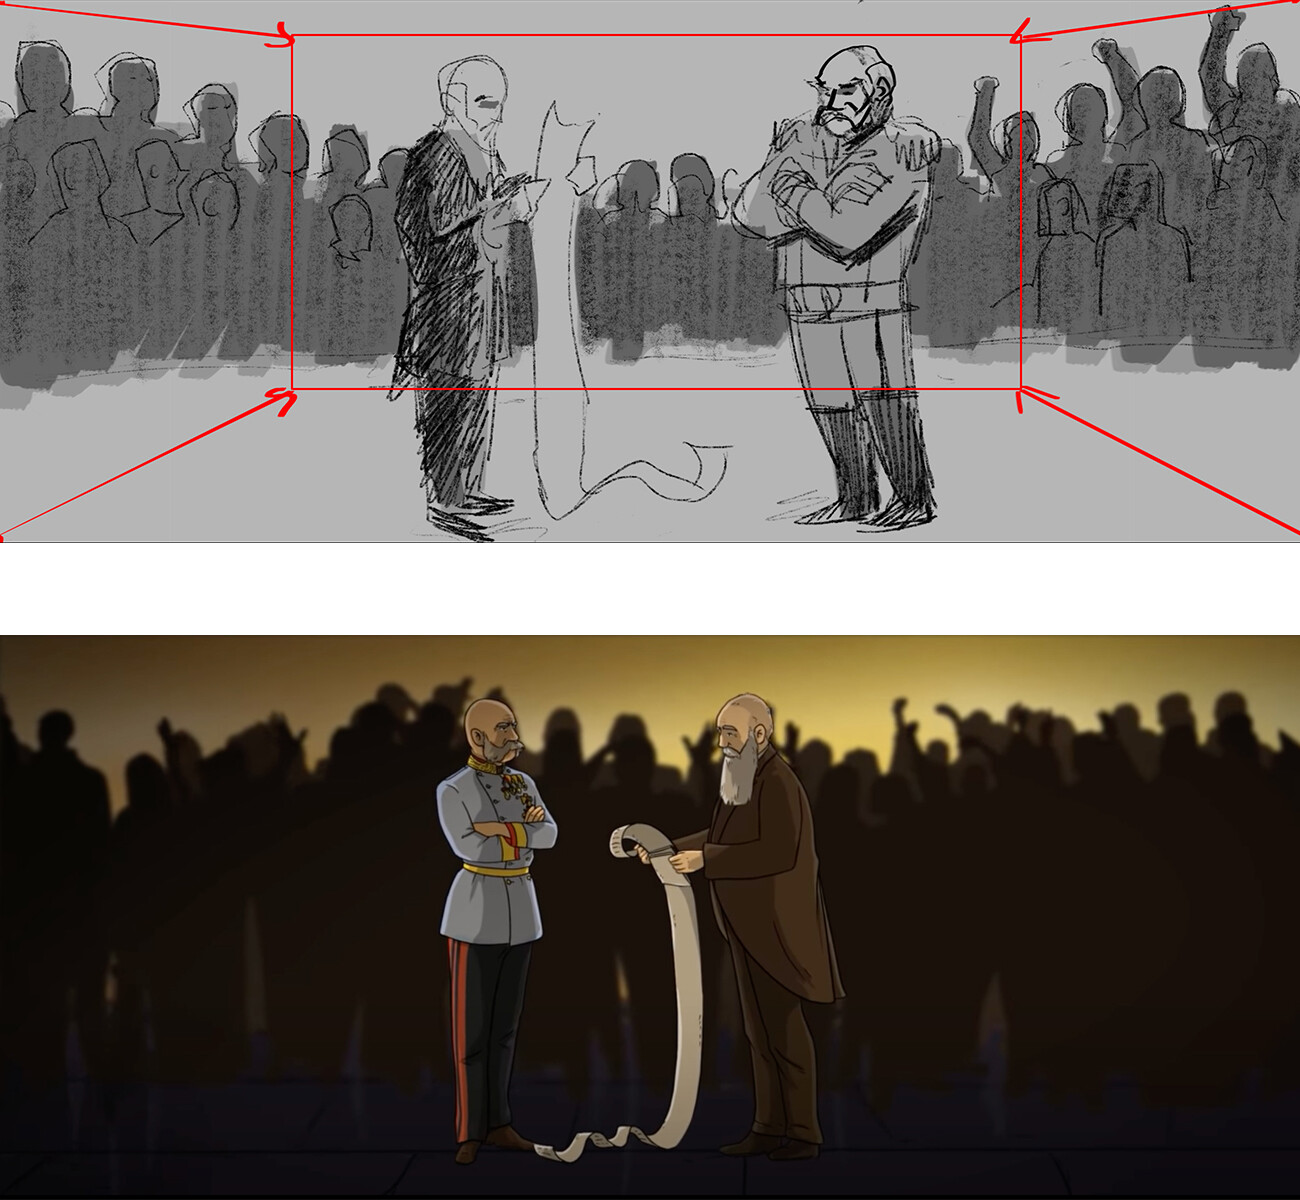 Comparison shot of my storyboards and screenshot of the final art put together by the phenomenal Illustration and Animation teams.